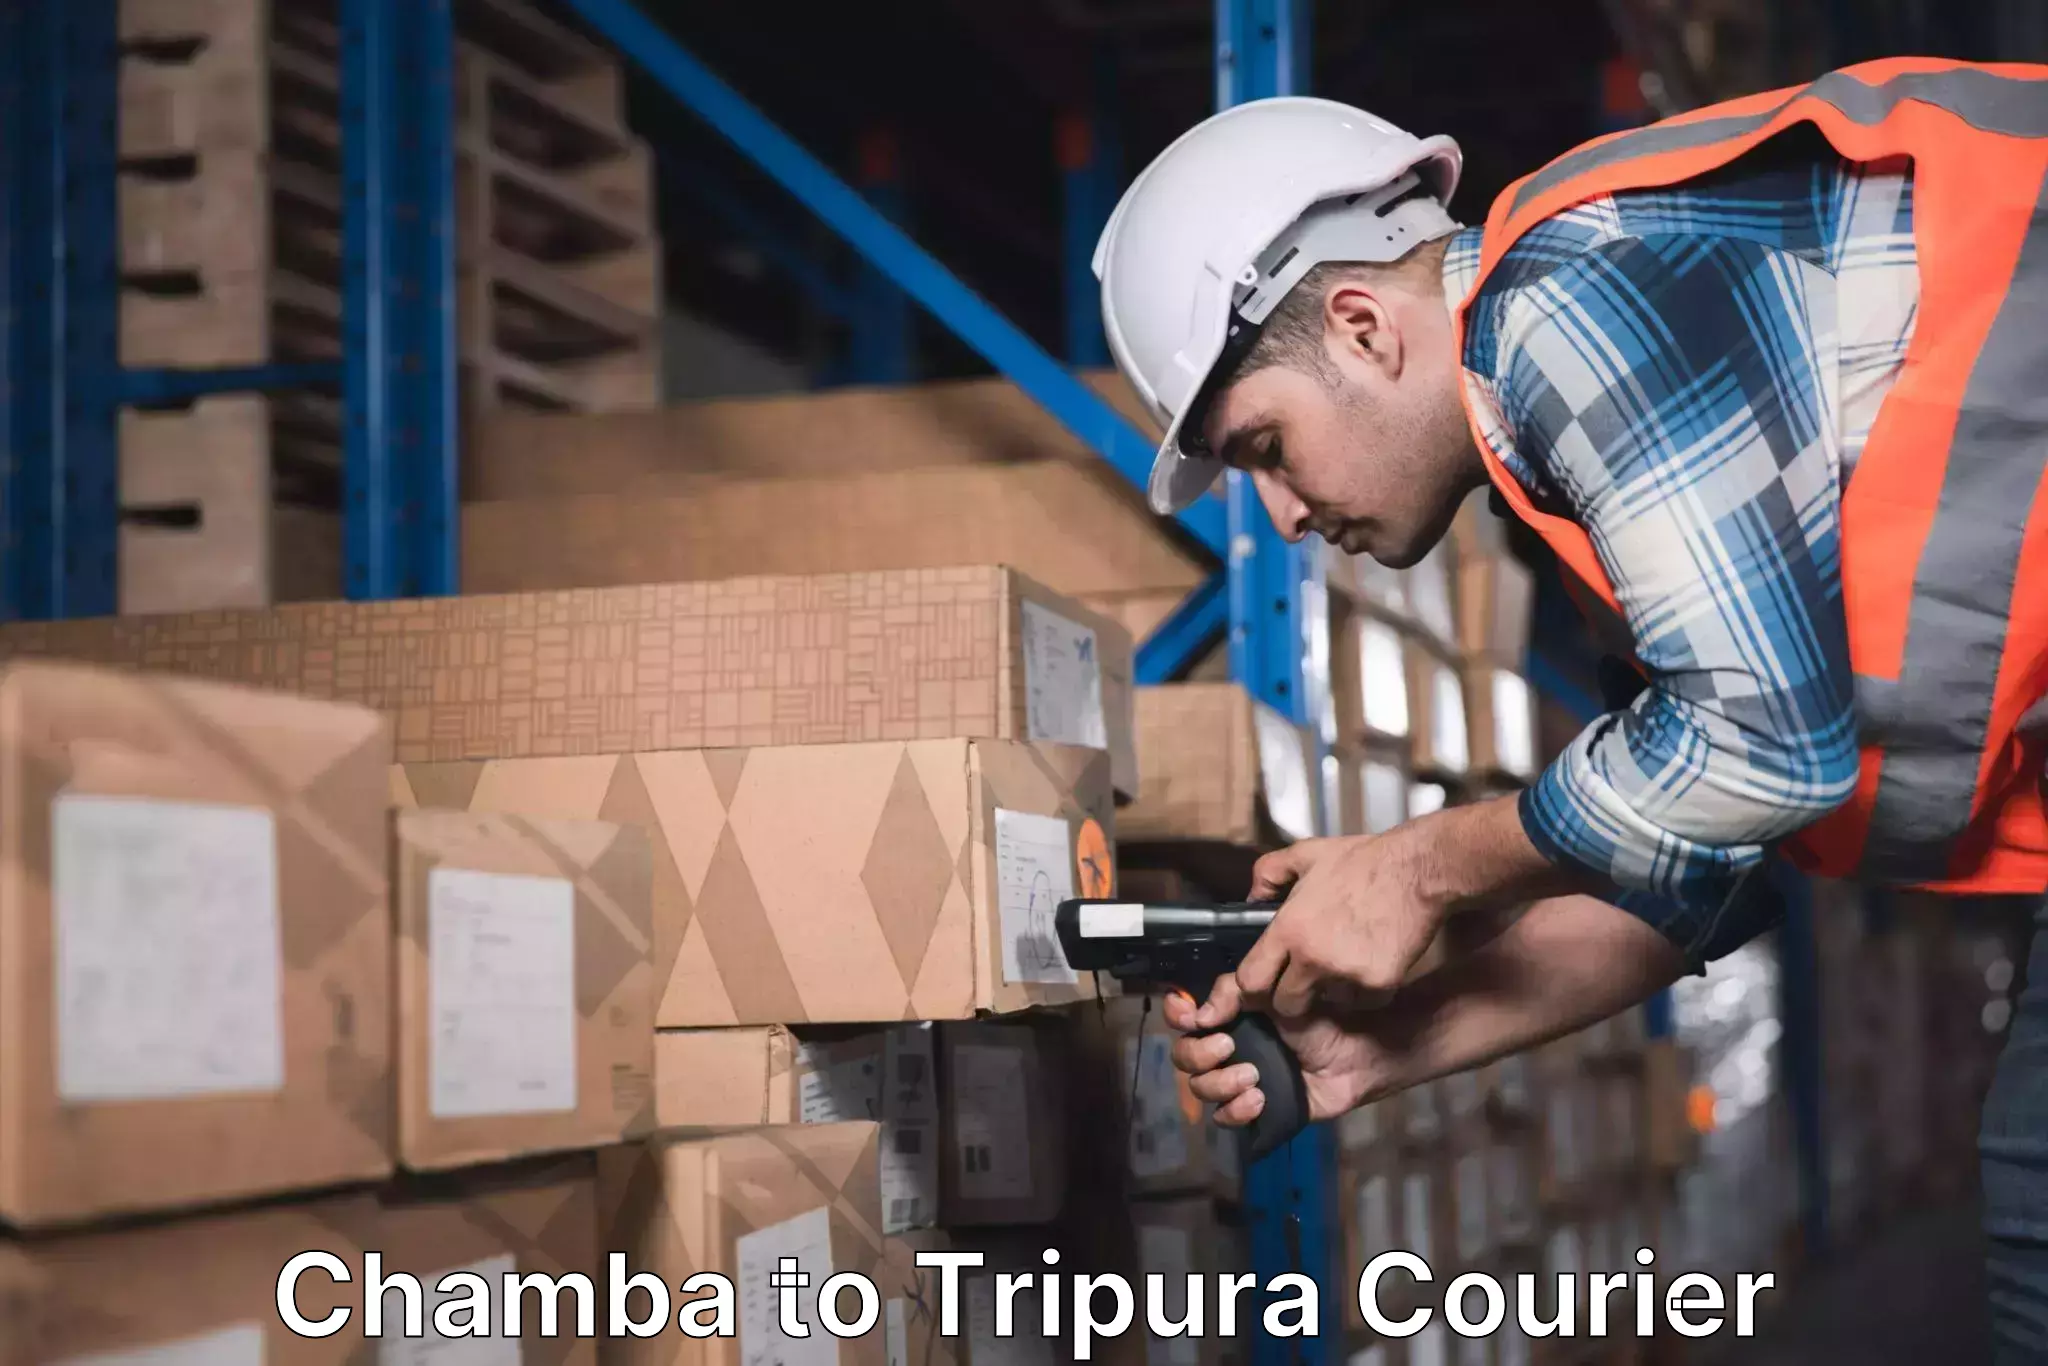 Reliable delivery network Chamba to Tripura